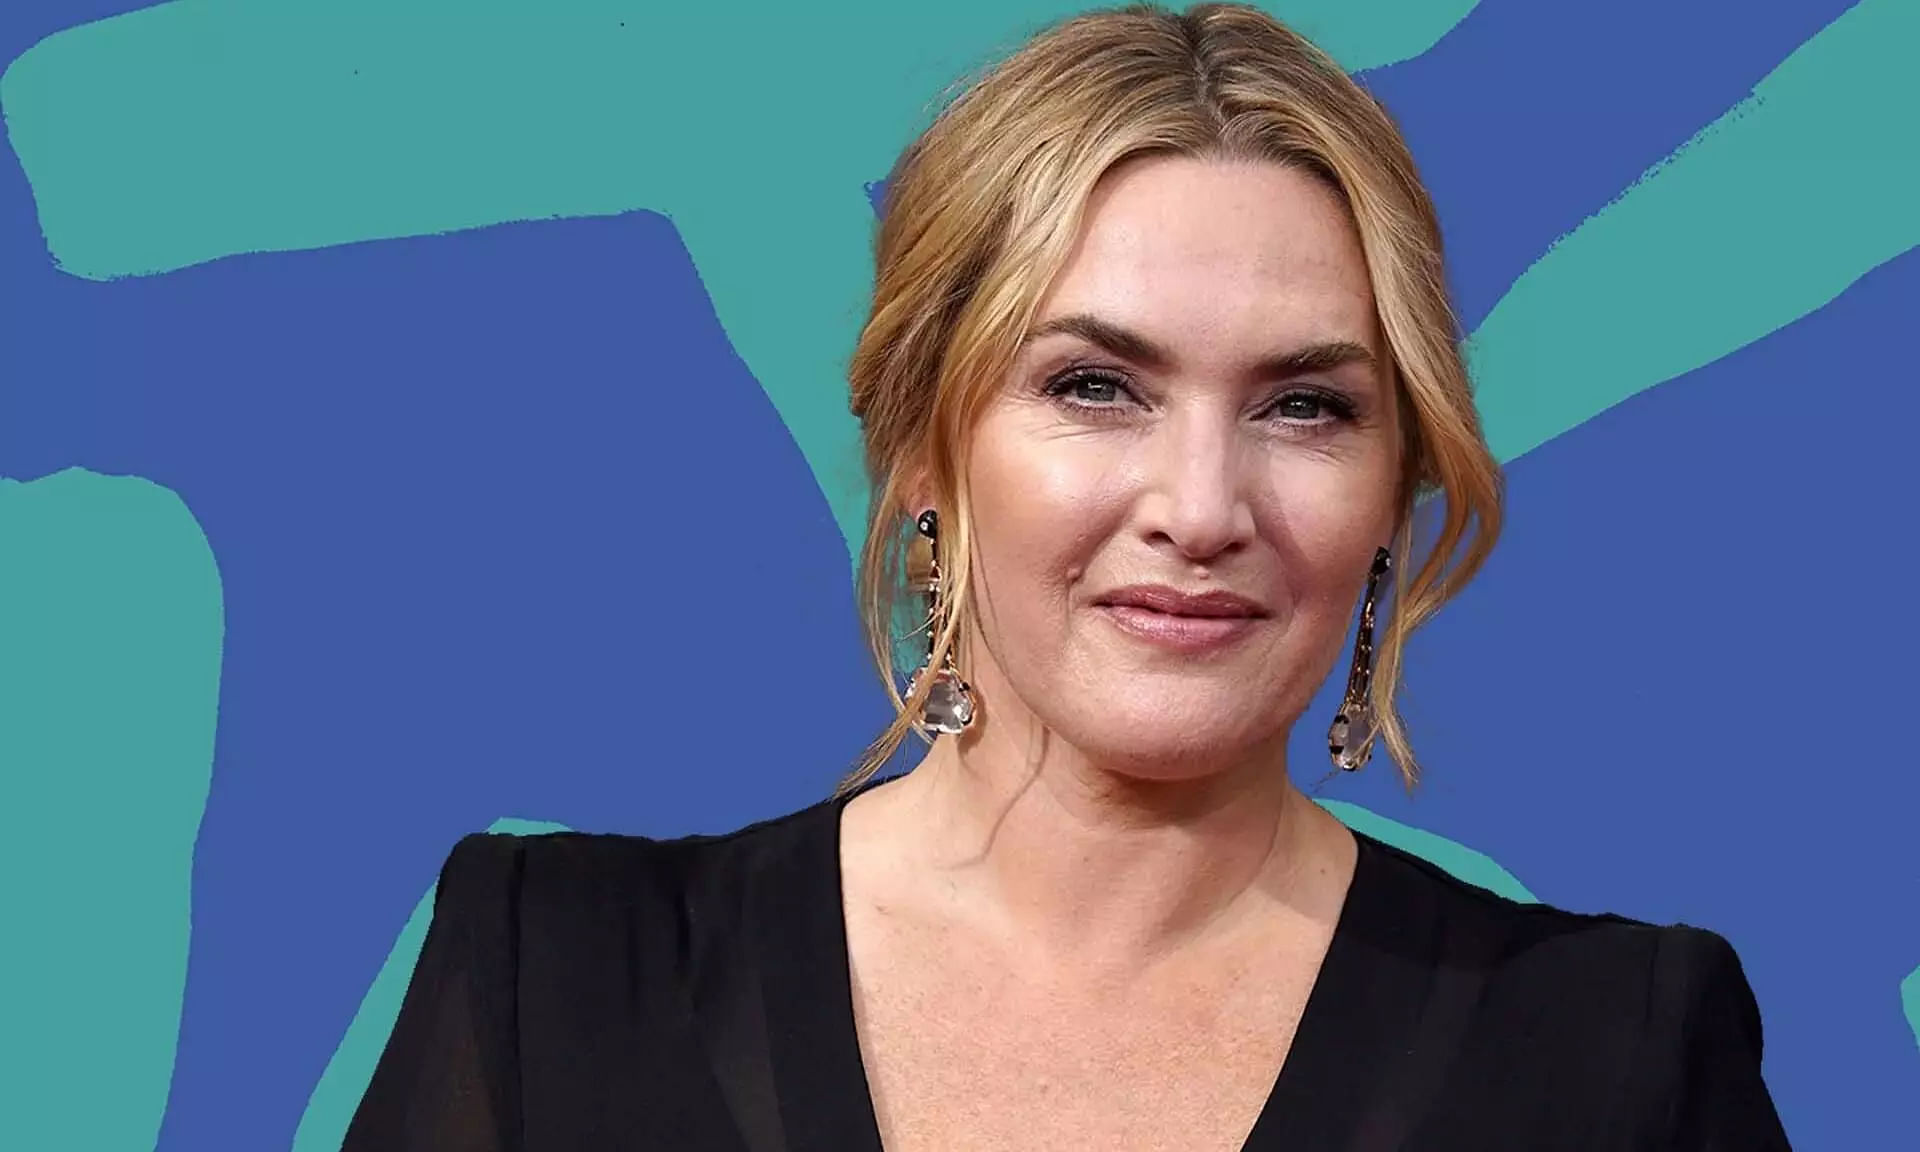 English actress Kate Winslet recallas her agent being asked about her weight